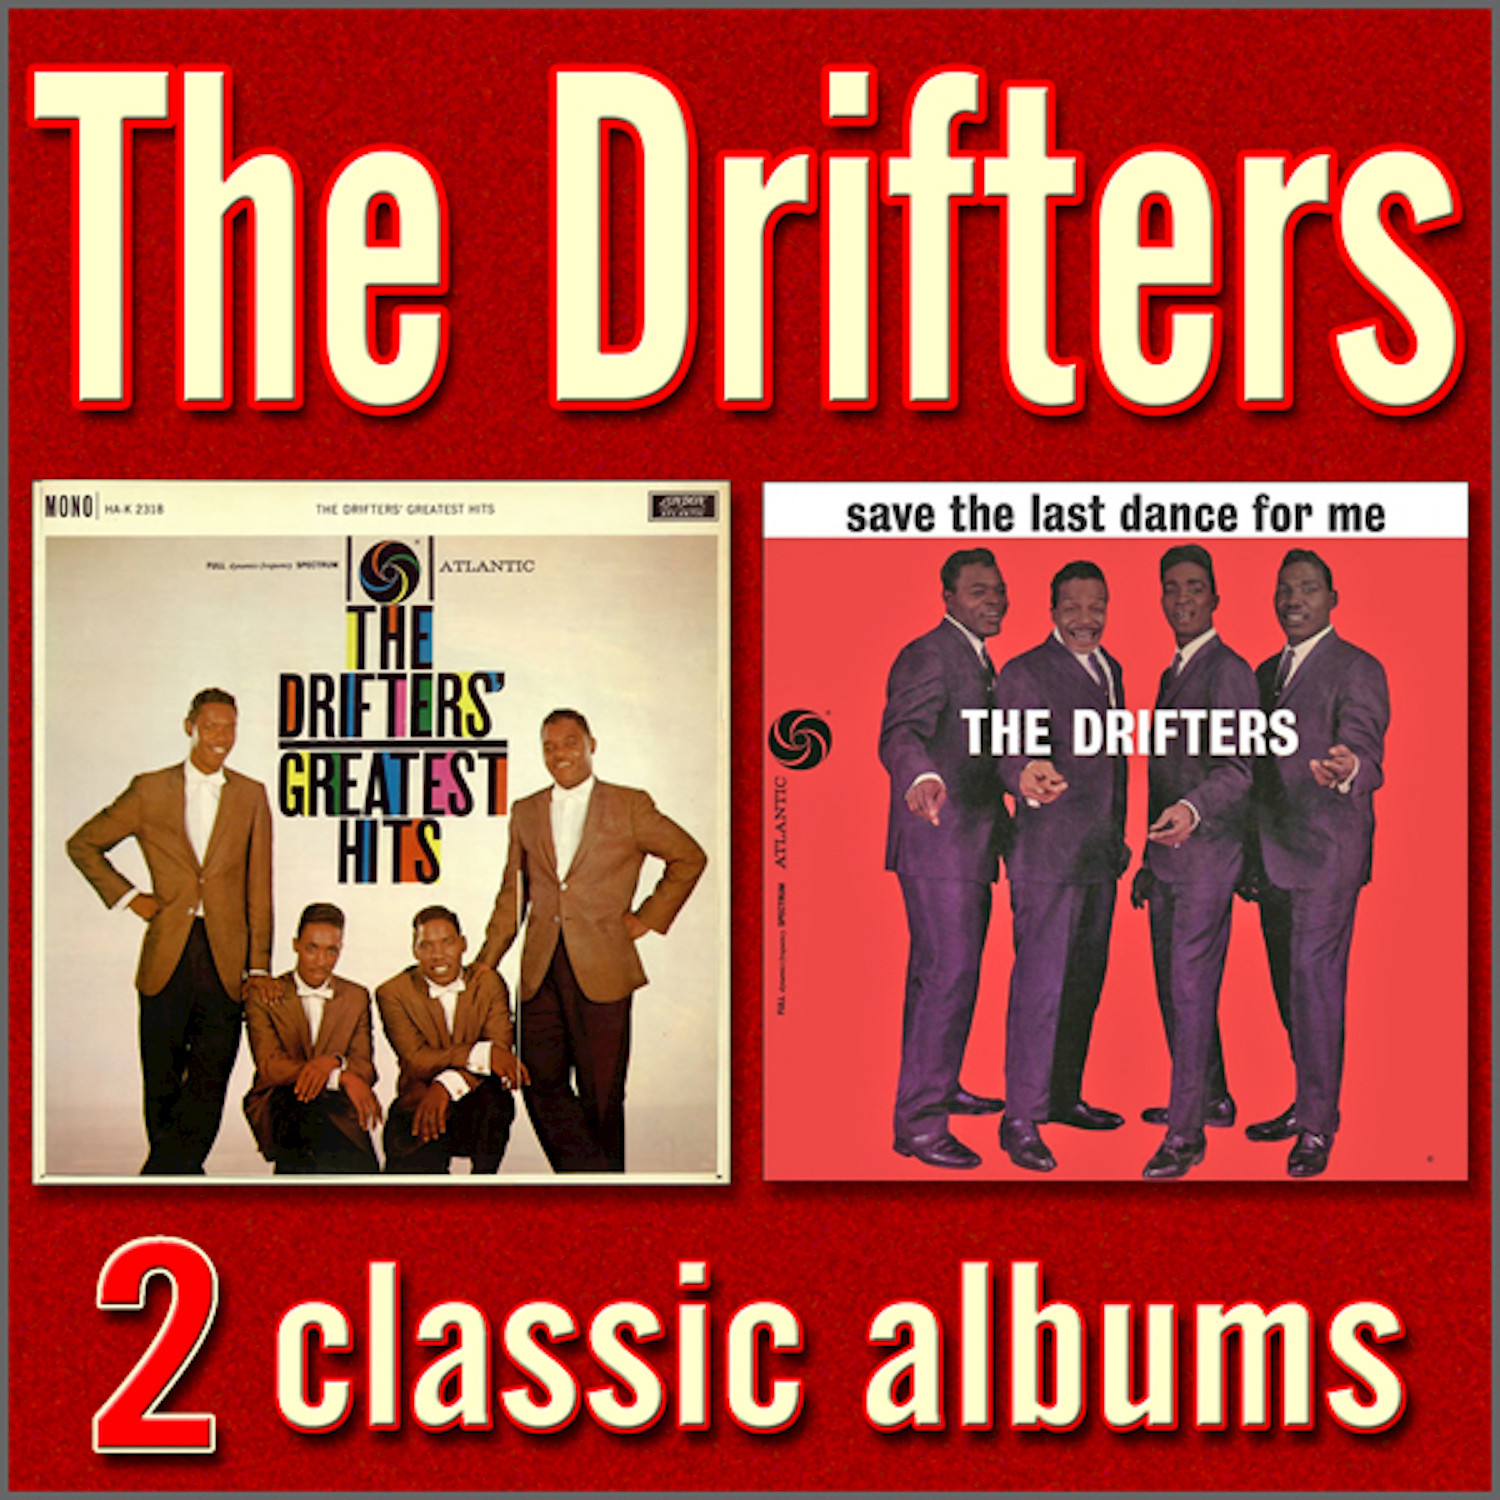 The Drifters' Greatest Hits / Save the Last Dance for Me